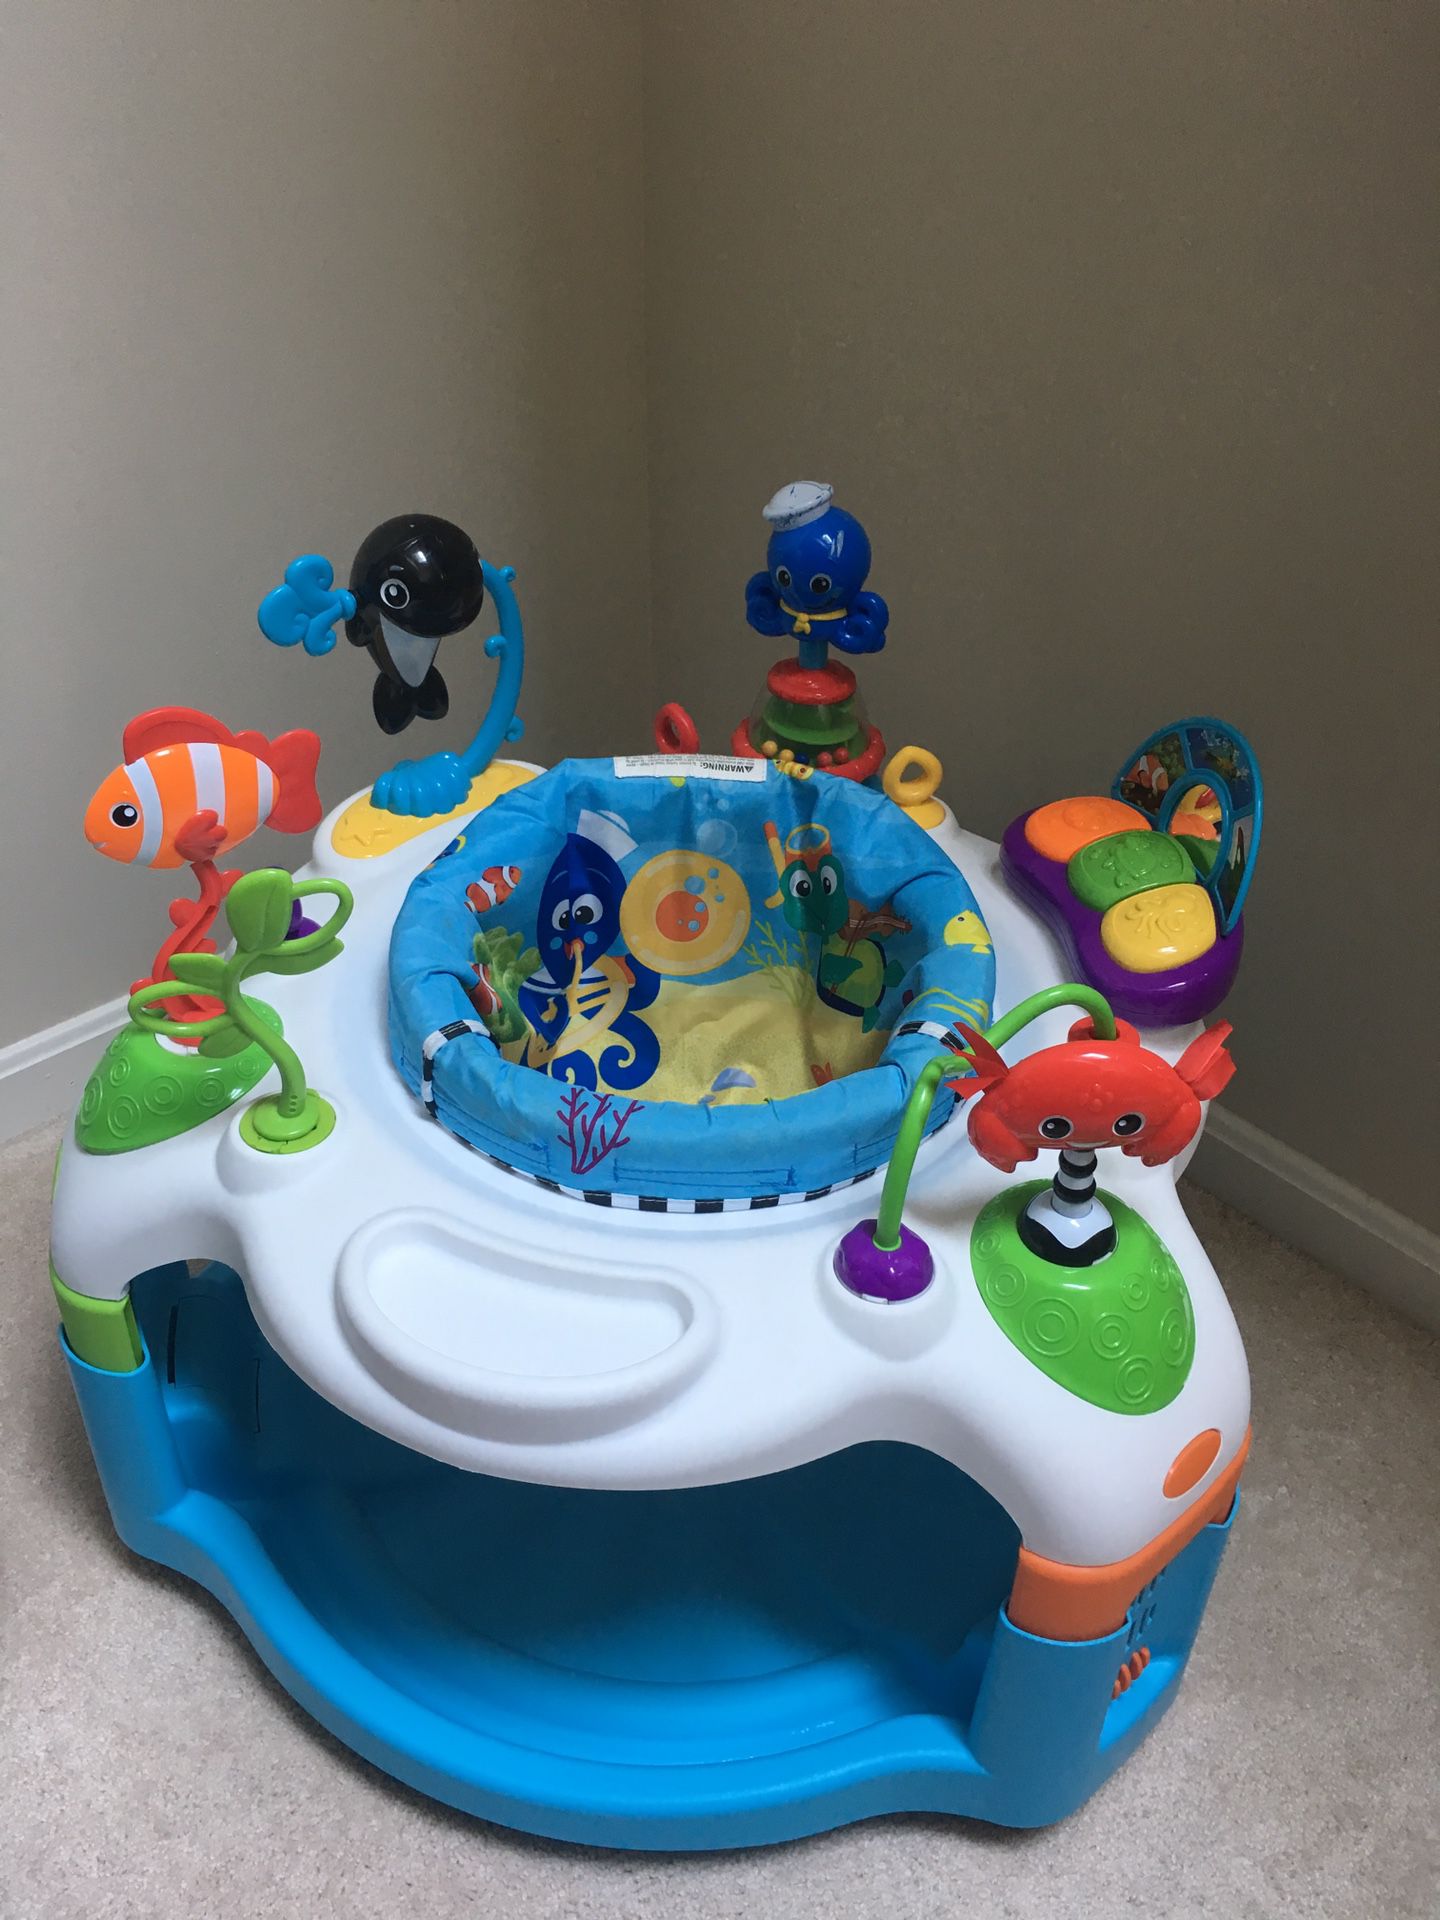 Baby Exersaucer - in very good condition!